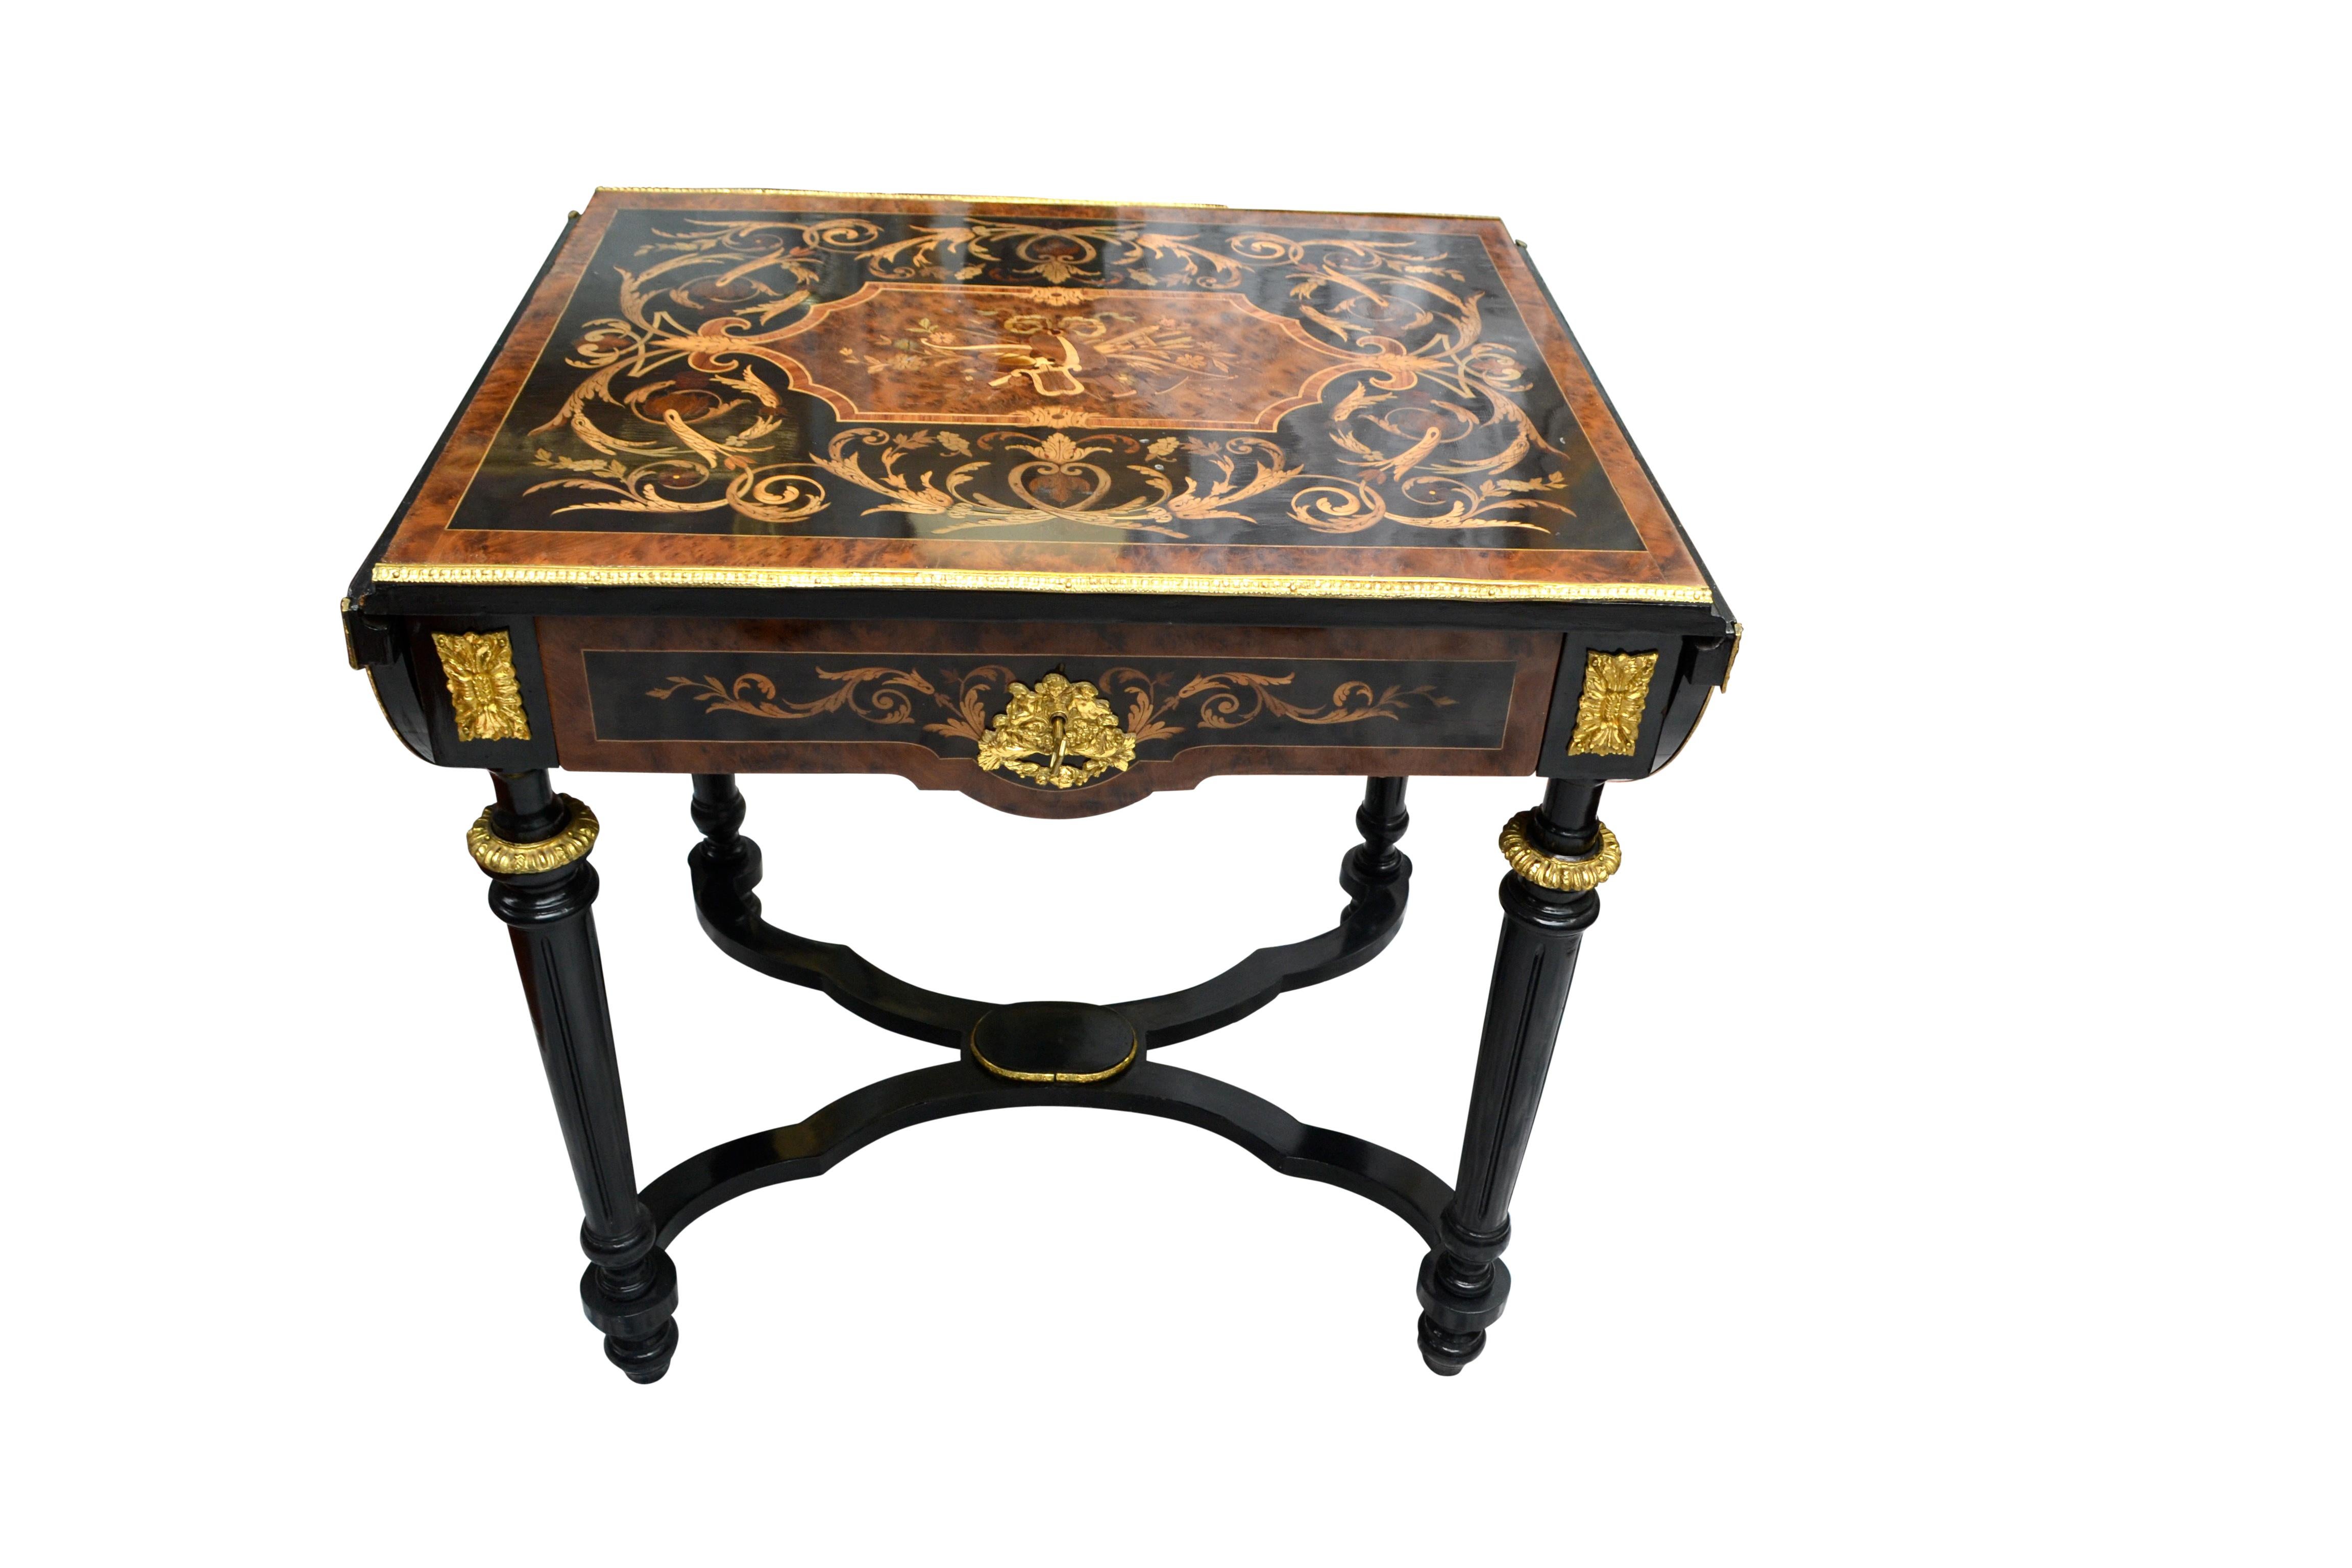 Napoleon III Inlaid Wood and Gilt Bronze Mounted Drop-Leaf Table In Good Condition For Sale In Vancouver, British Columbia